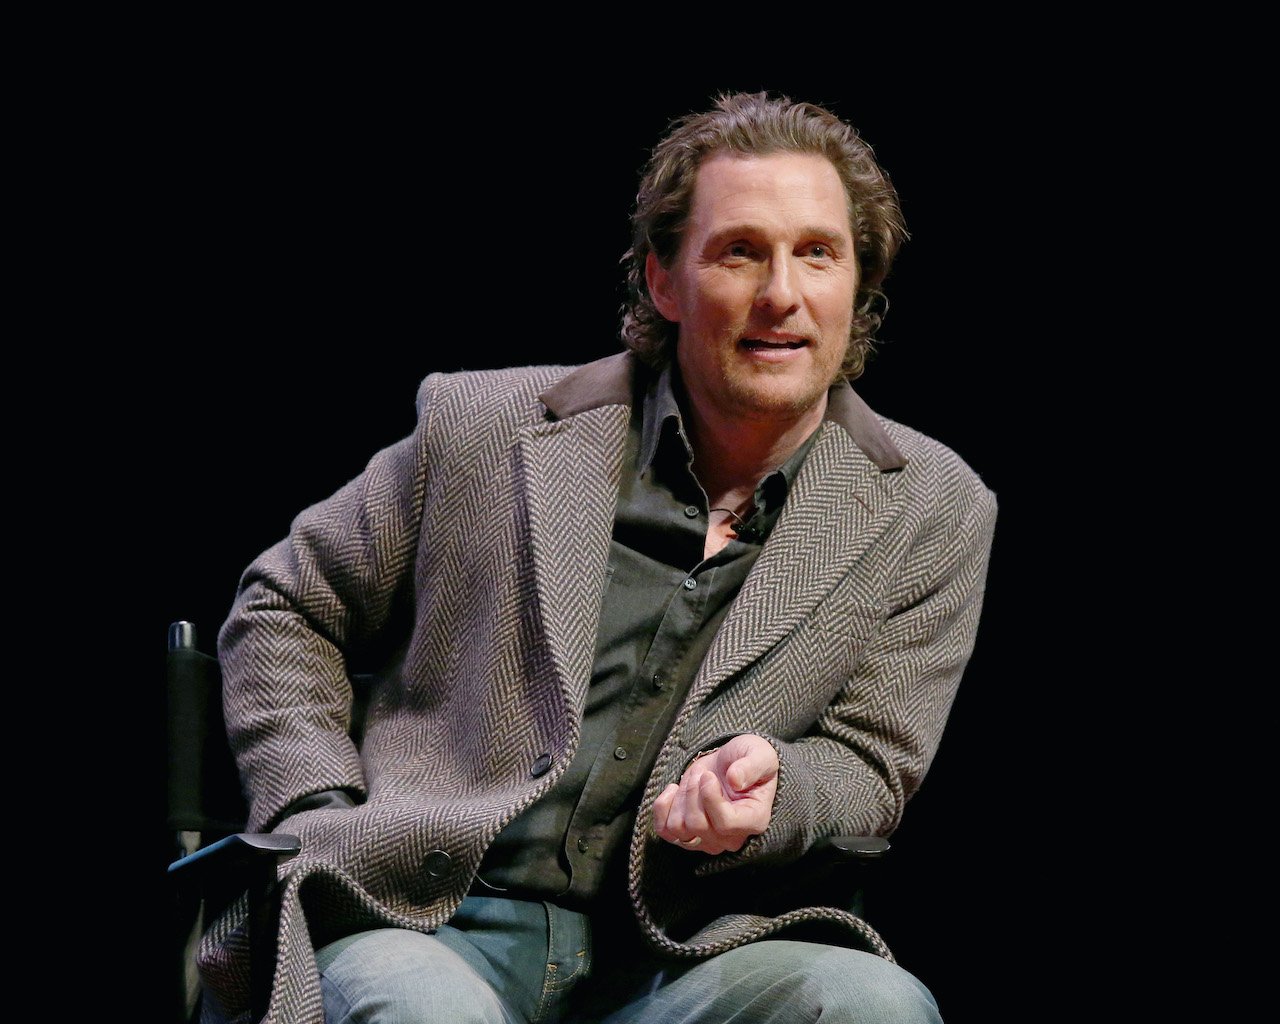 Matthew McConaughey Only Saw 3 Movies in Theaters Before the Age of 17